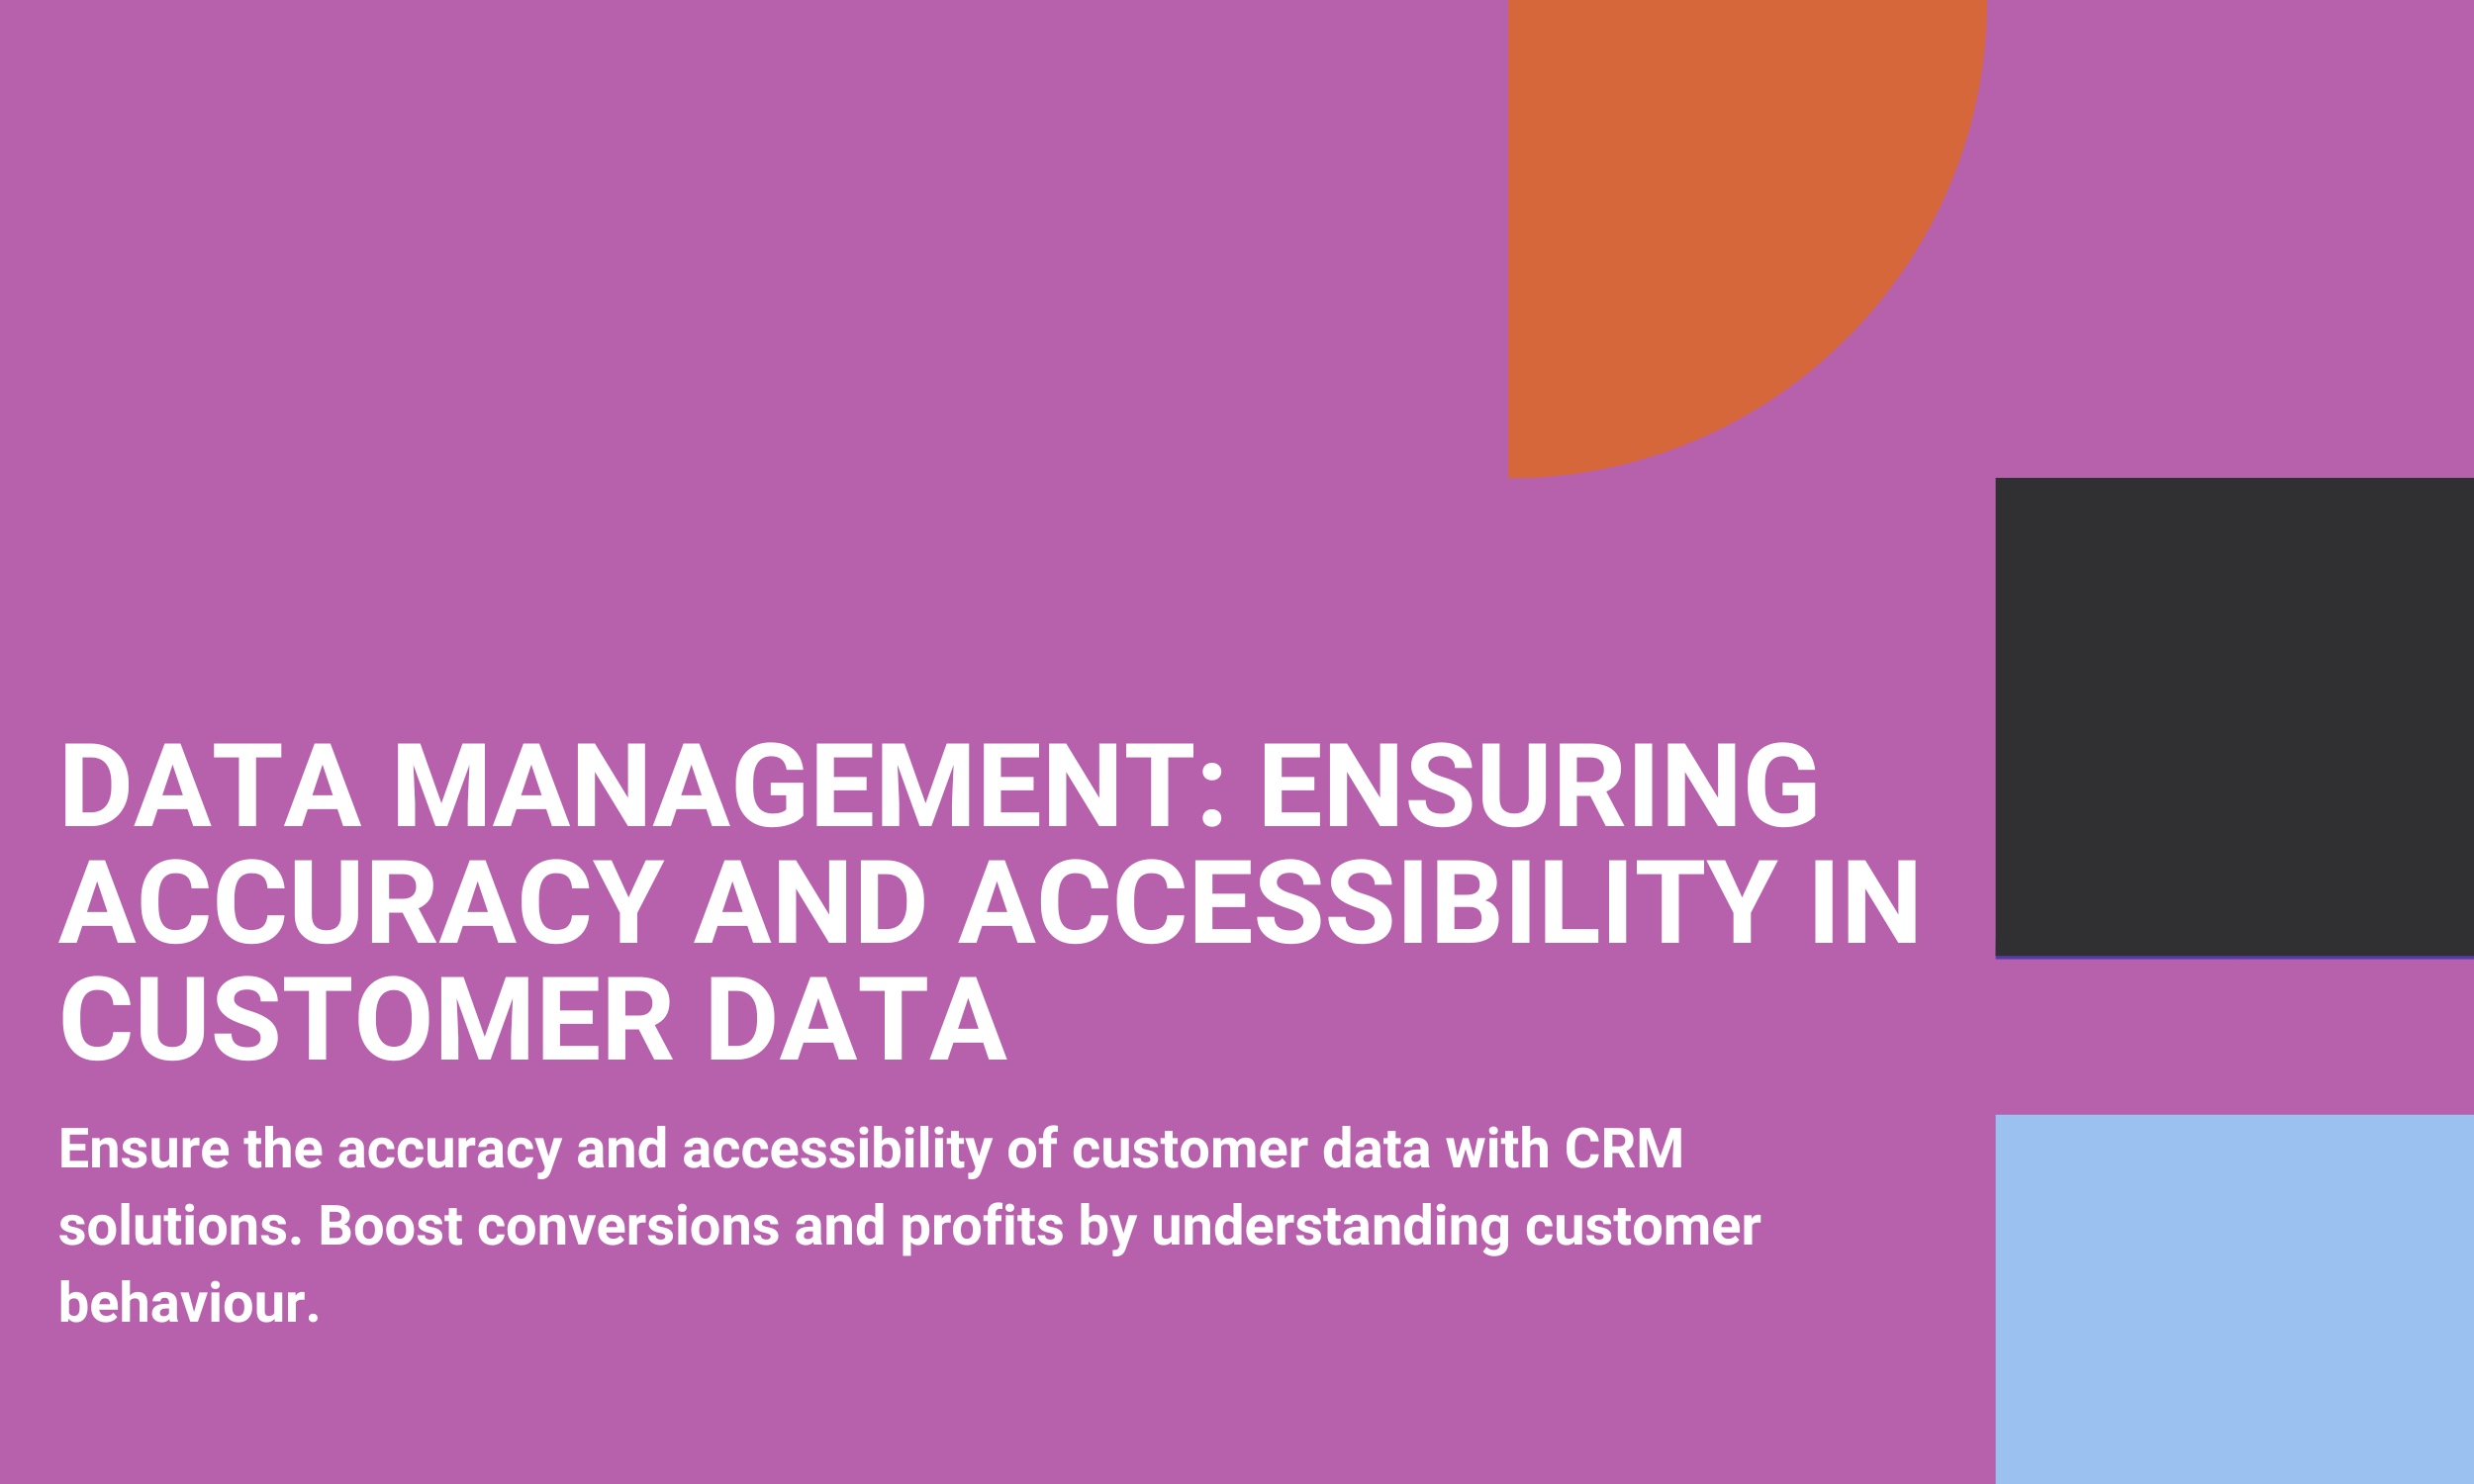 Data Management: Ensuring accuracy and accessibility in customer data